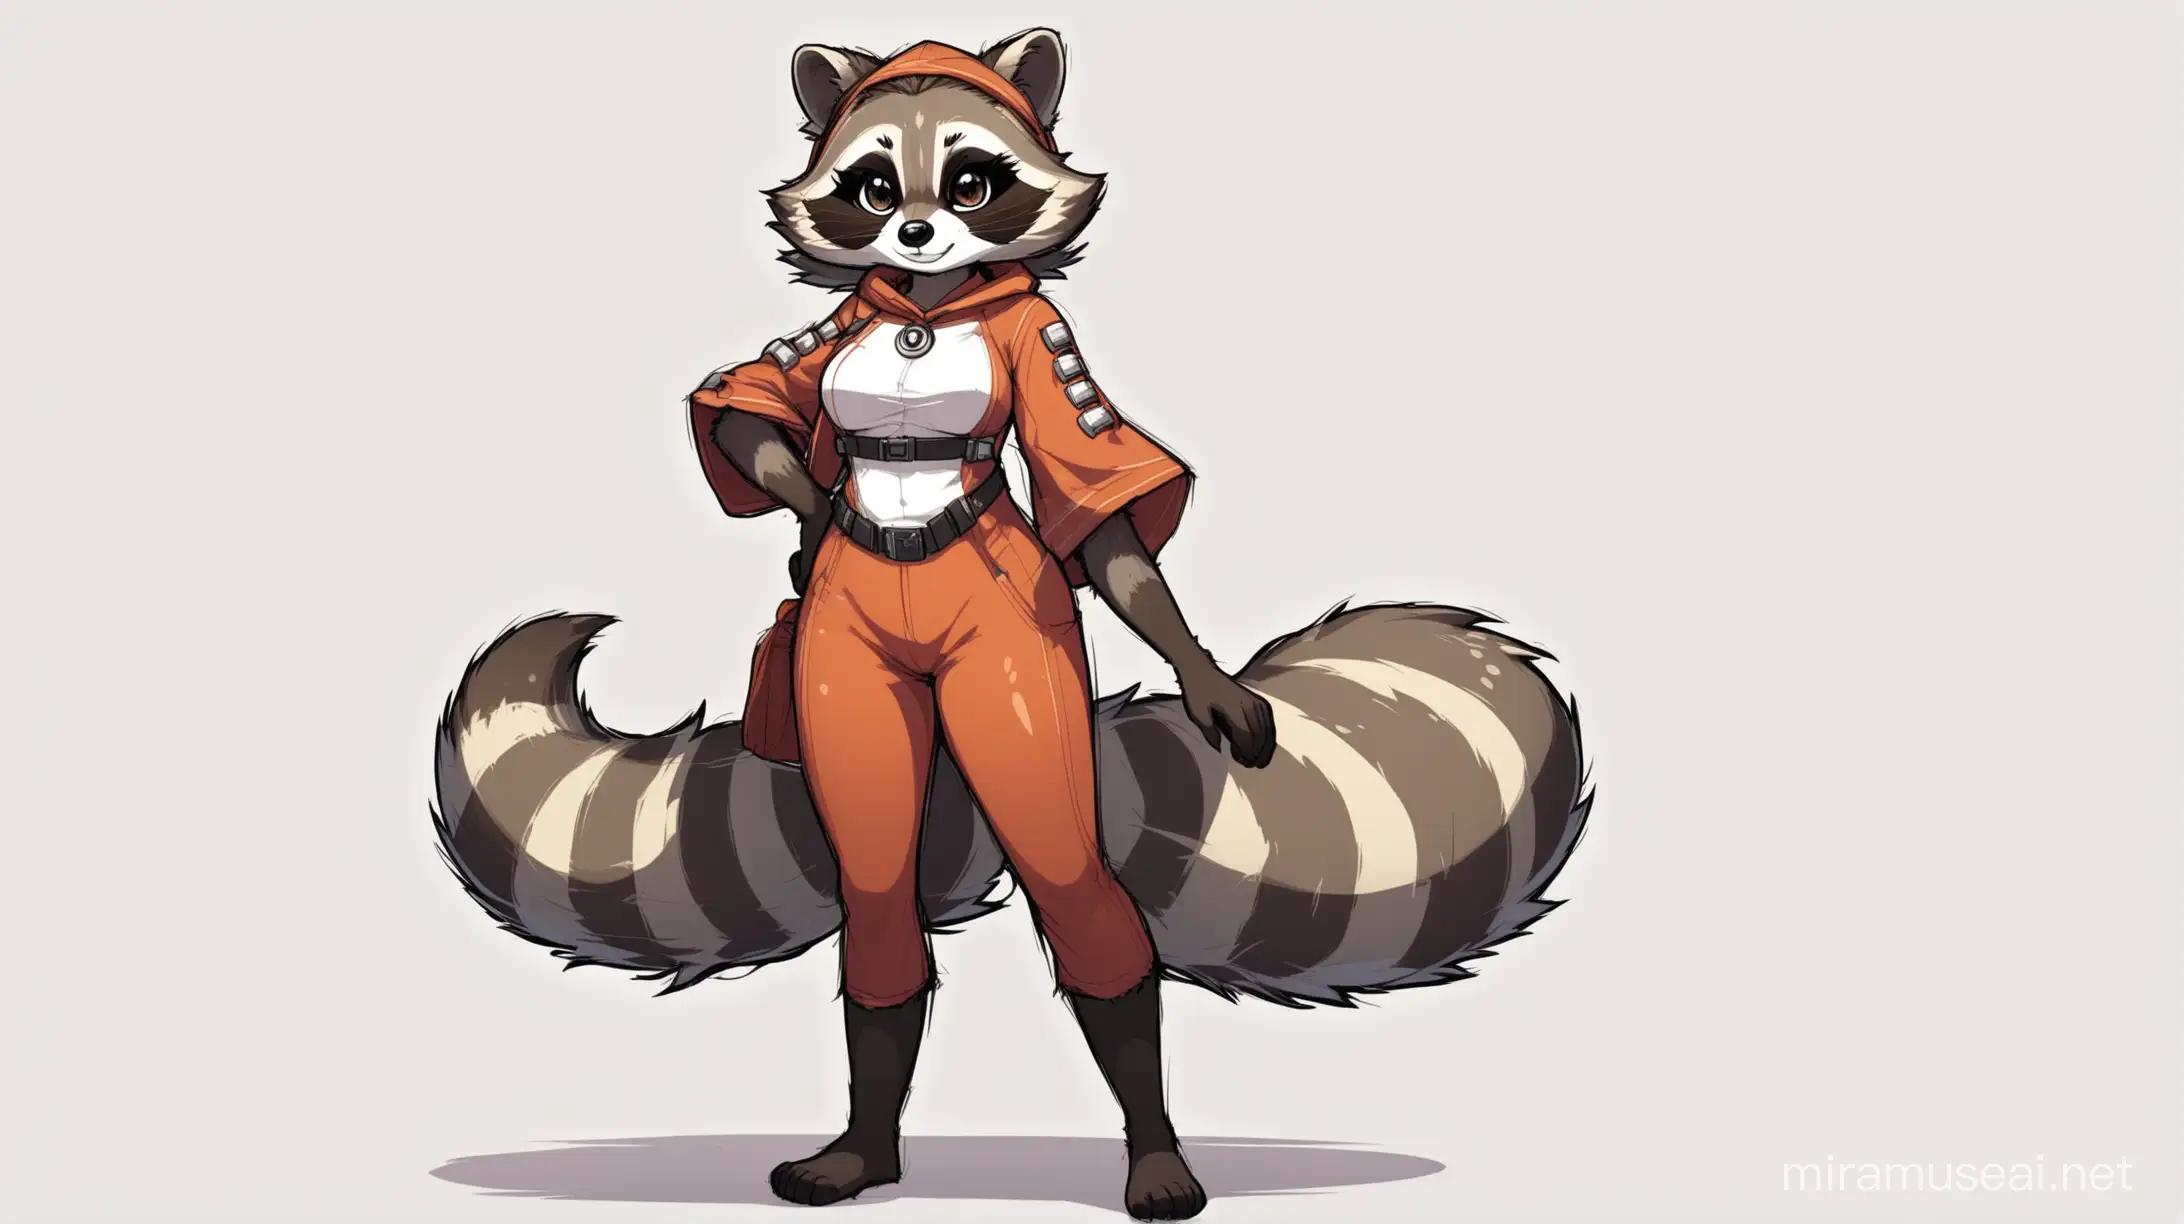 Furry Raccoon Girl in Stylish Attire Against White Background